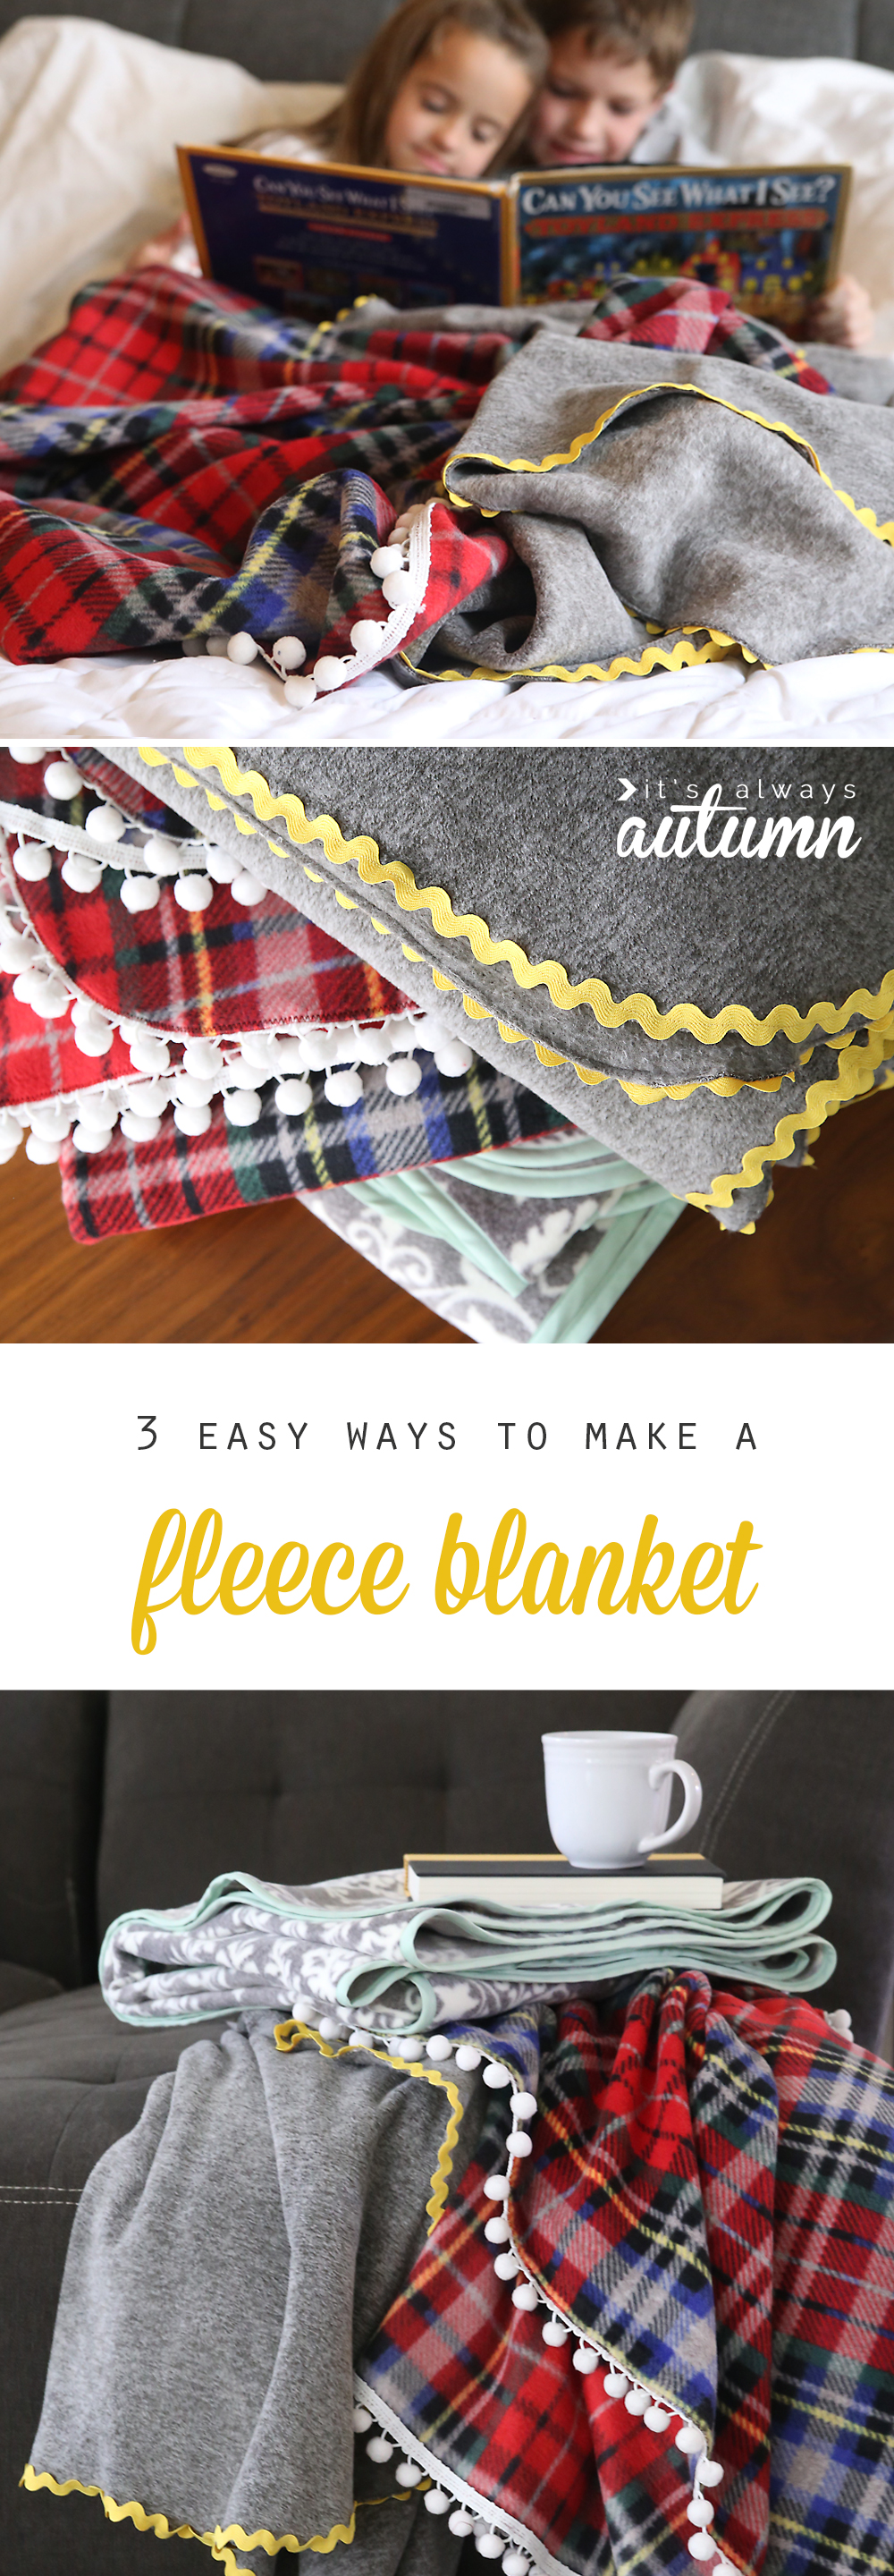 These DIY fleece blankets are gorgeous! How to make a fleece blanket. Great DIY Christmas or holiday gift idea!